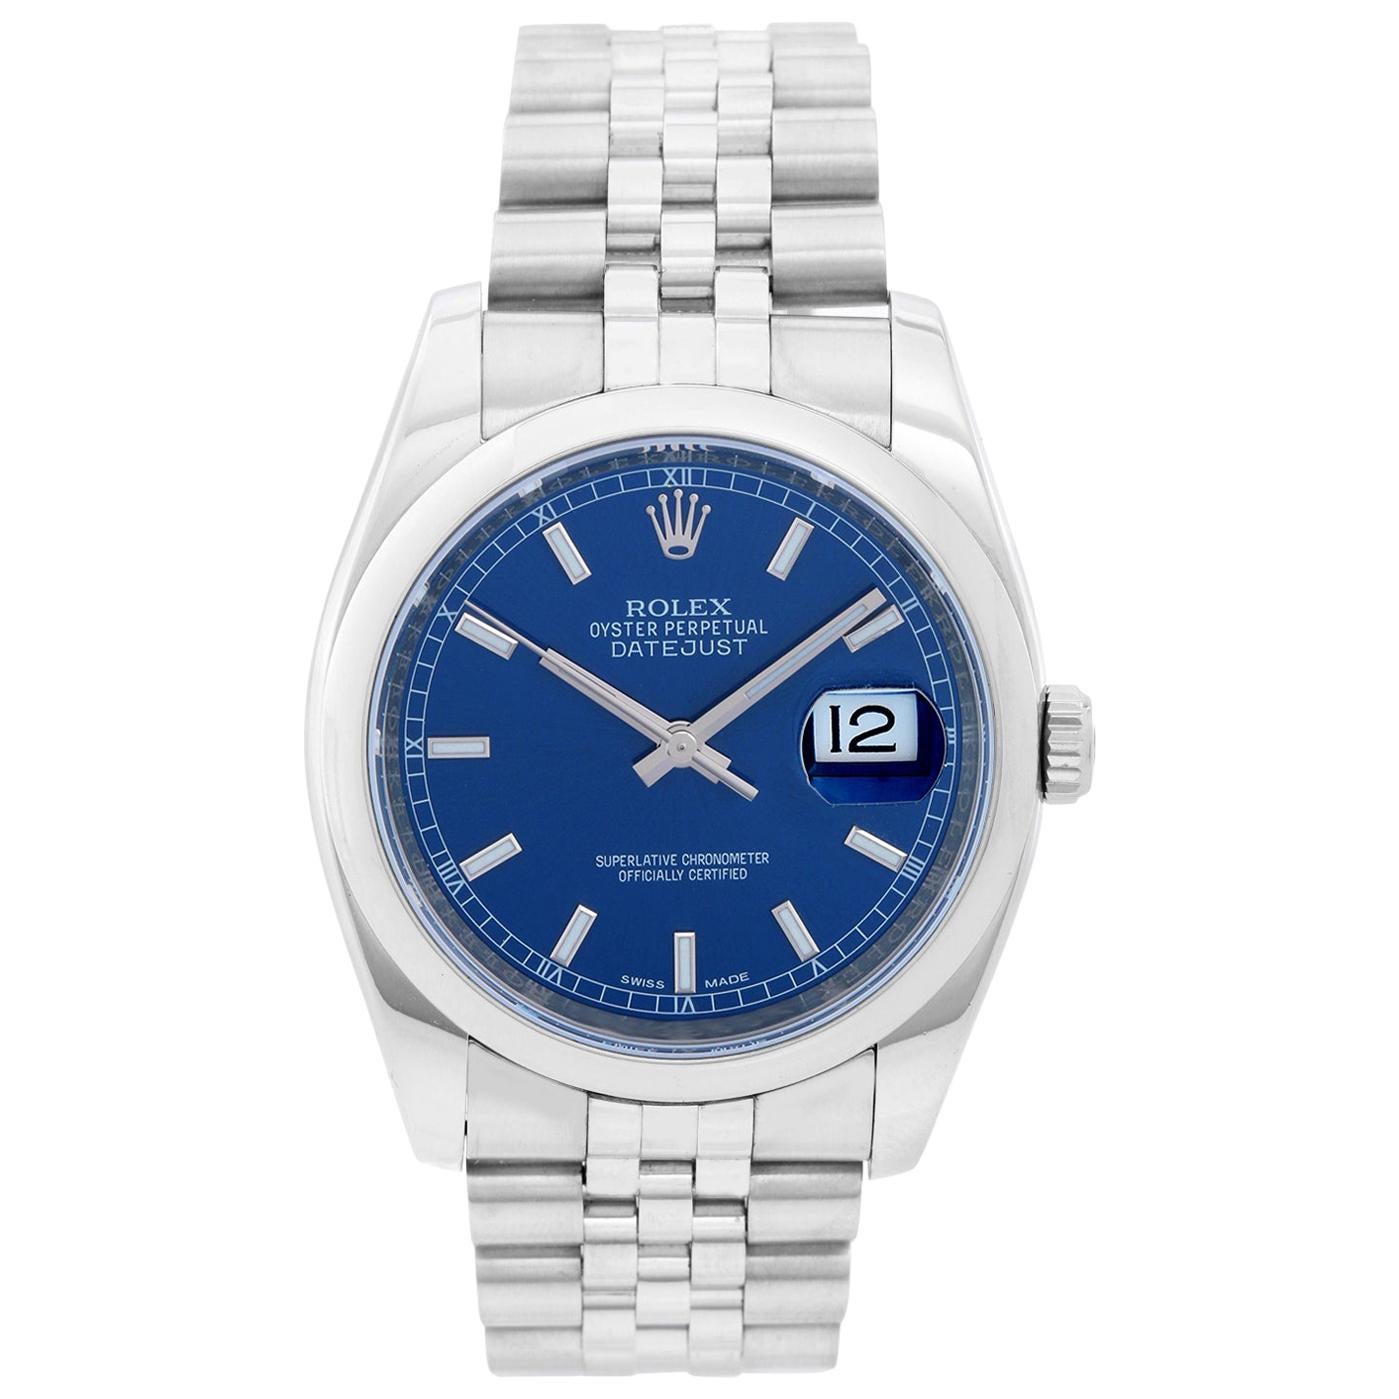 Rolex Datejust Men's Stainless Steel Automatic Winding Watch 116200